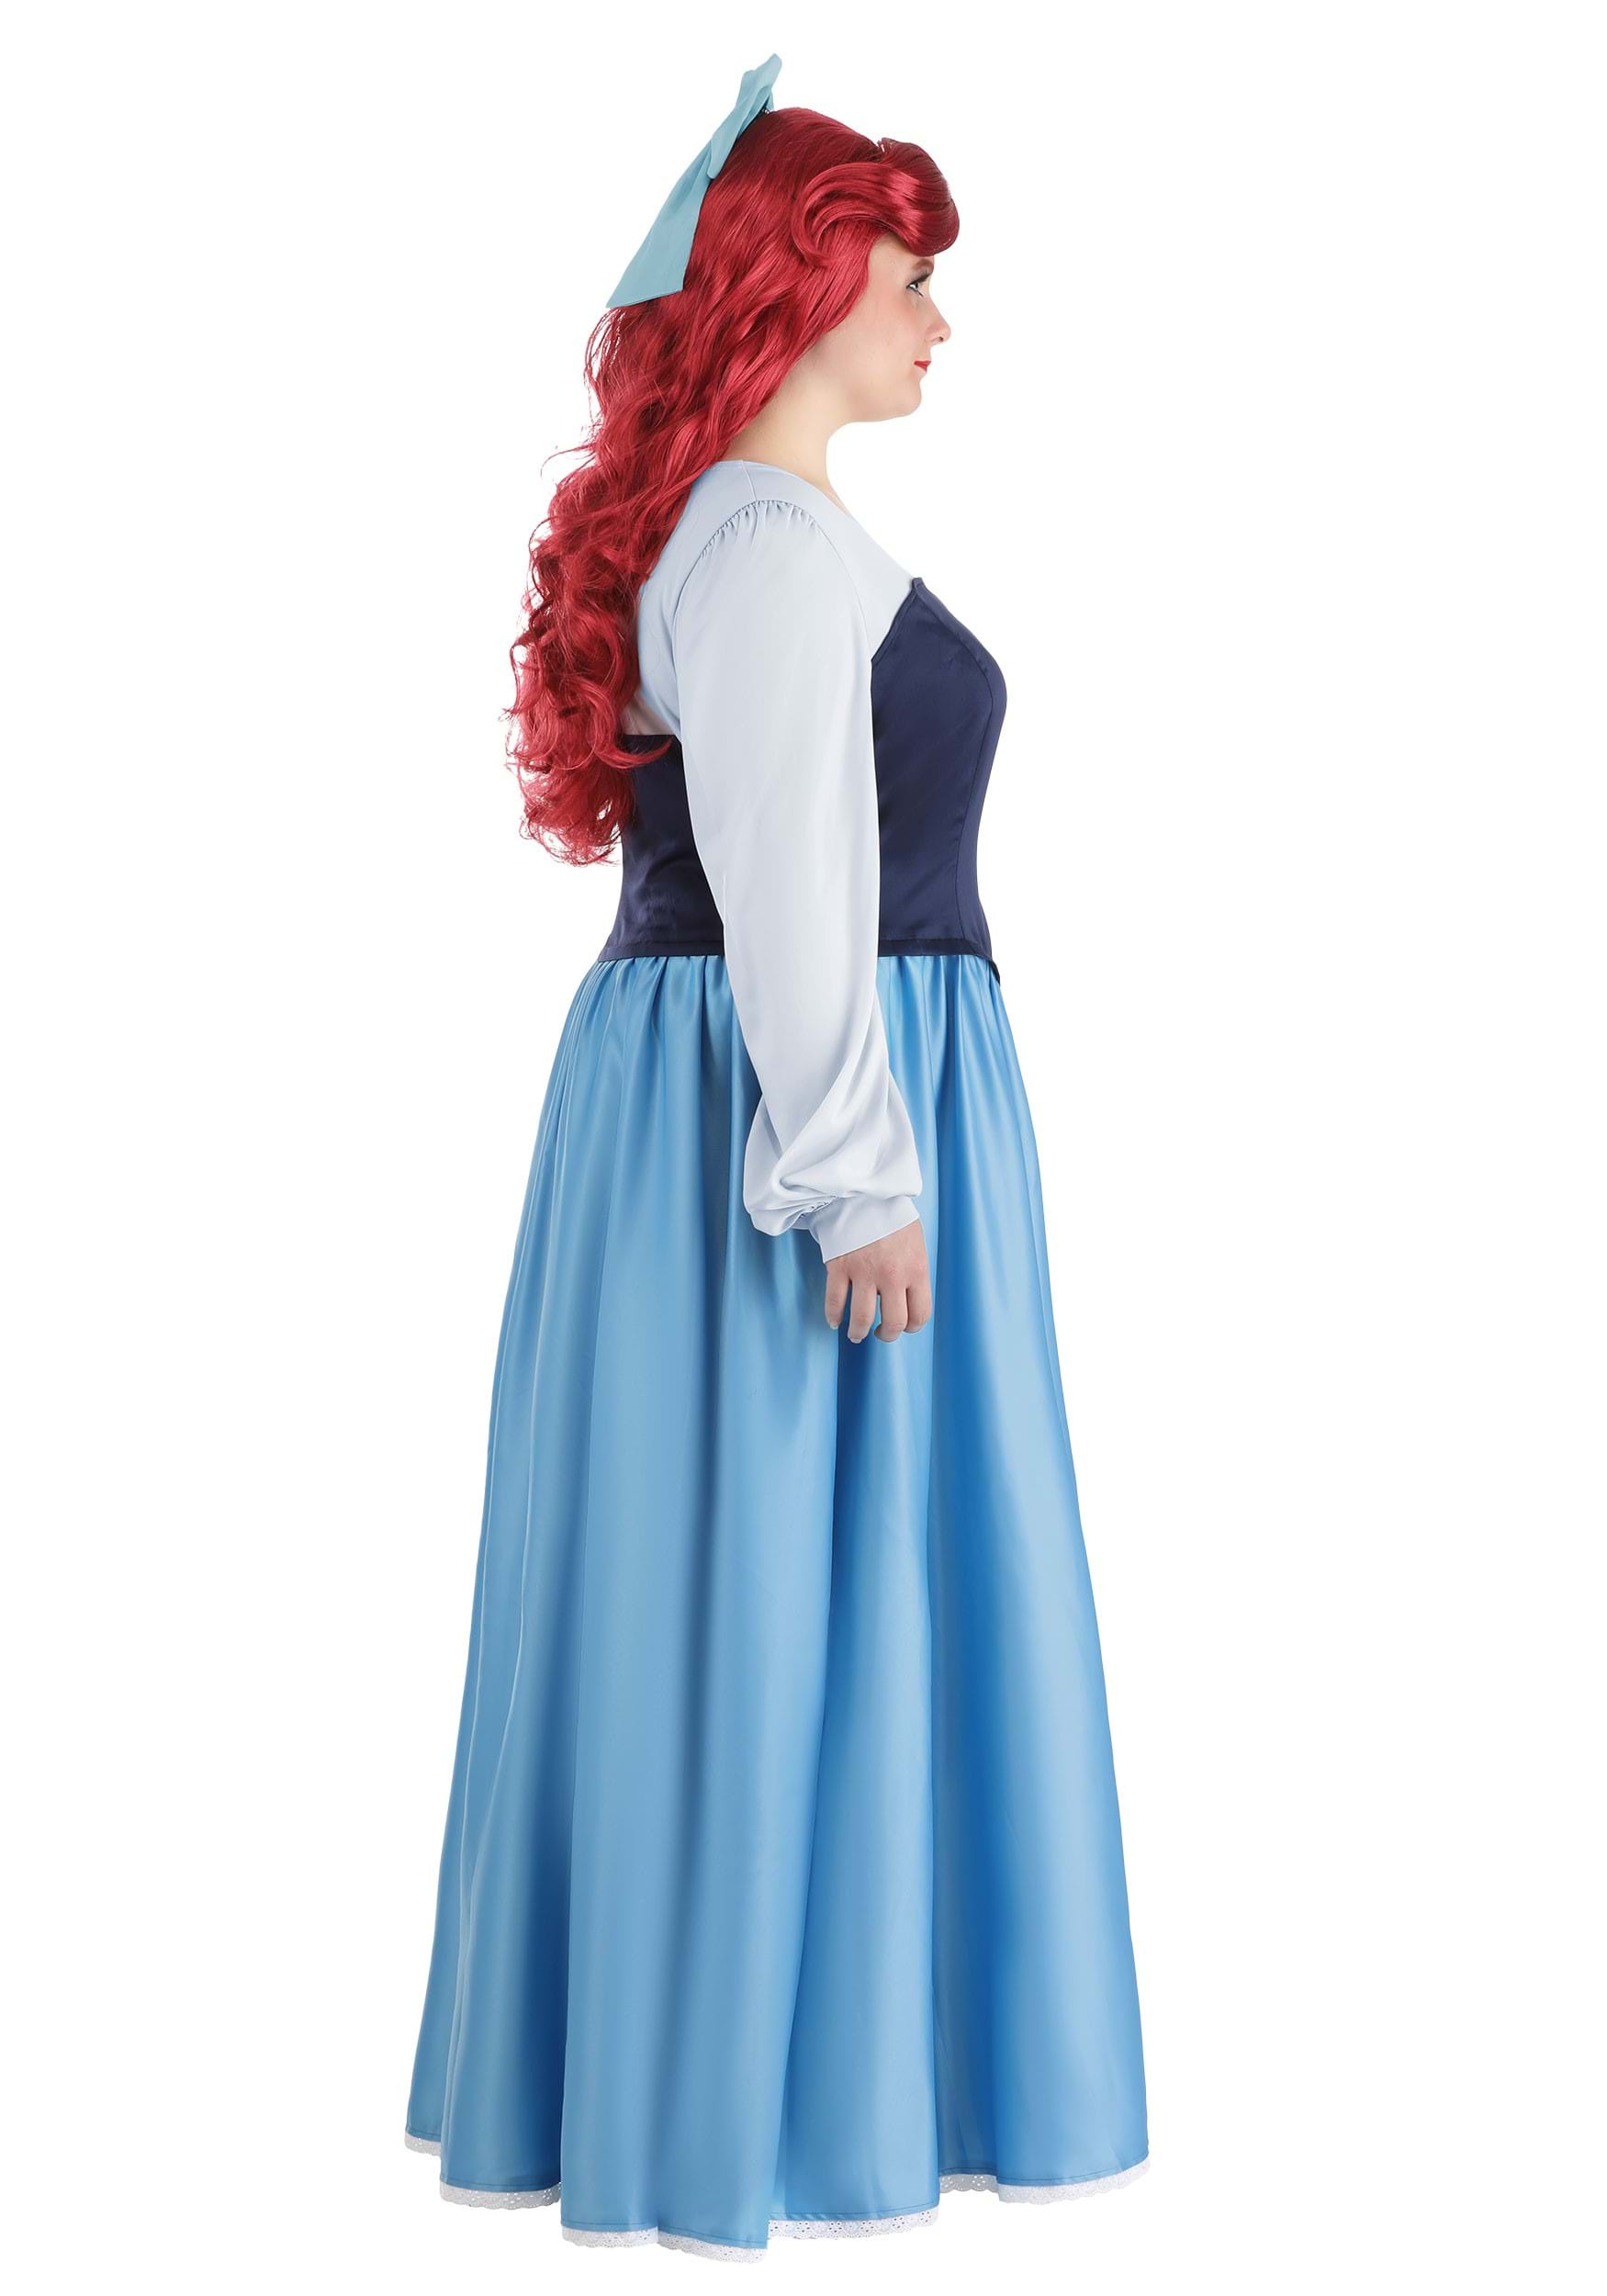 The Little Mermaid Ariel Blue Dress Costume For Women Clothing, Shoes